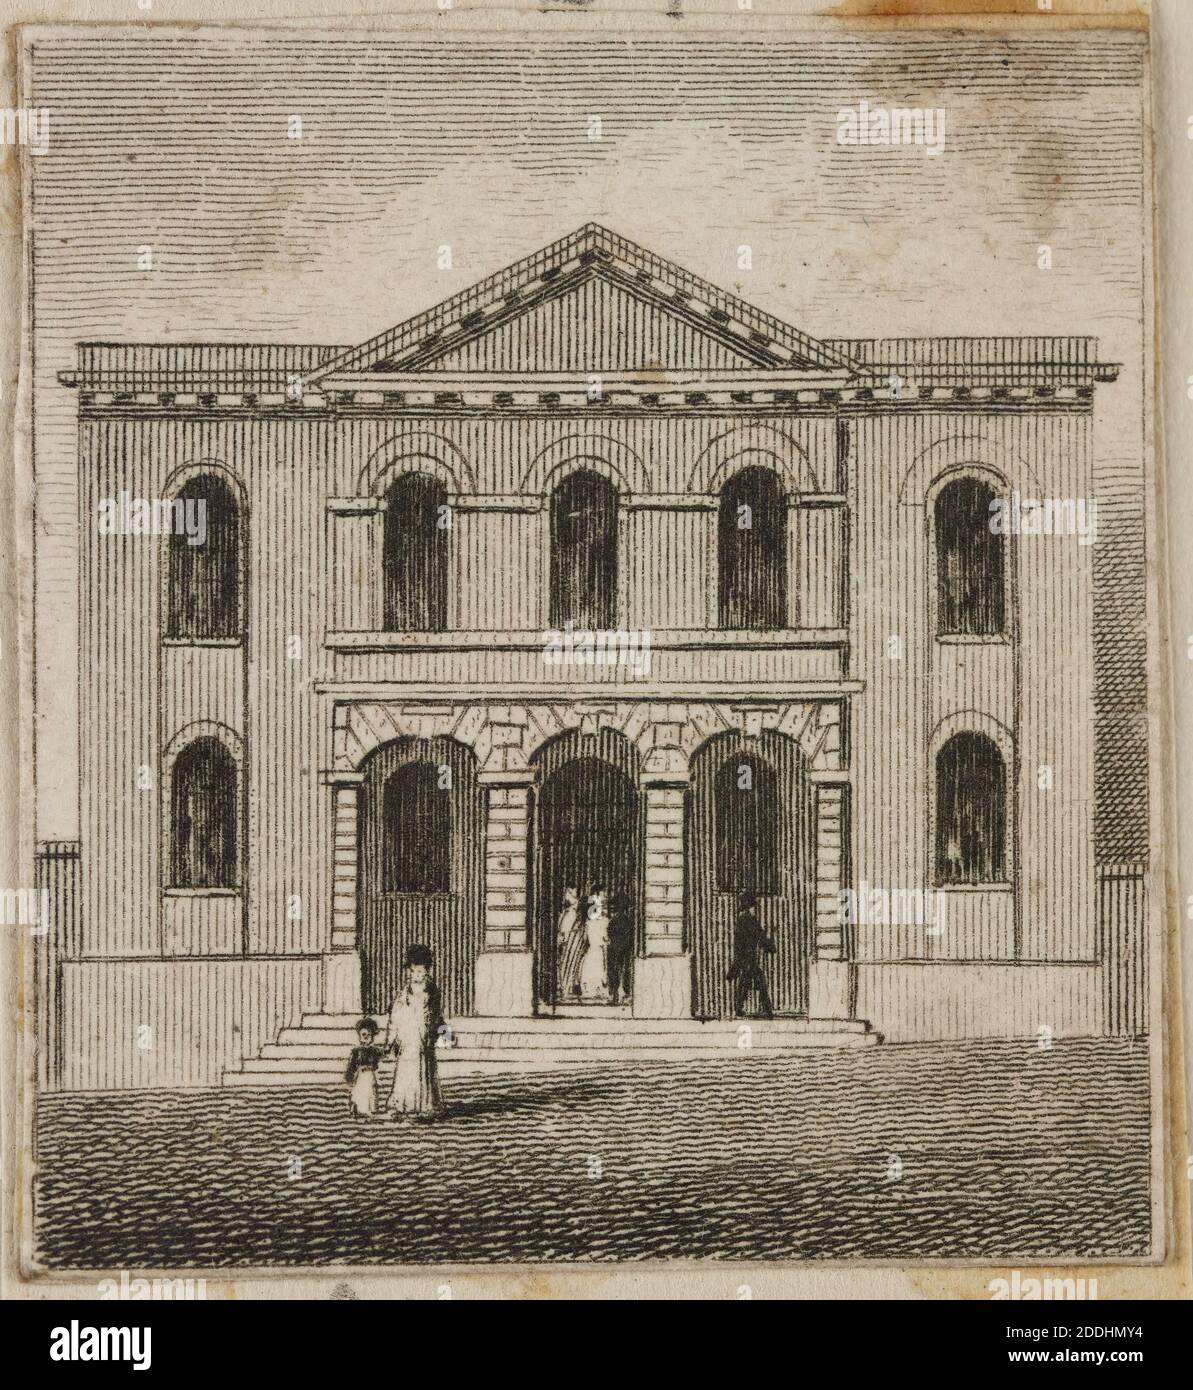 Engraving of Old Meeting House, Topographical Views, Birmingham history Stock Photo